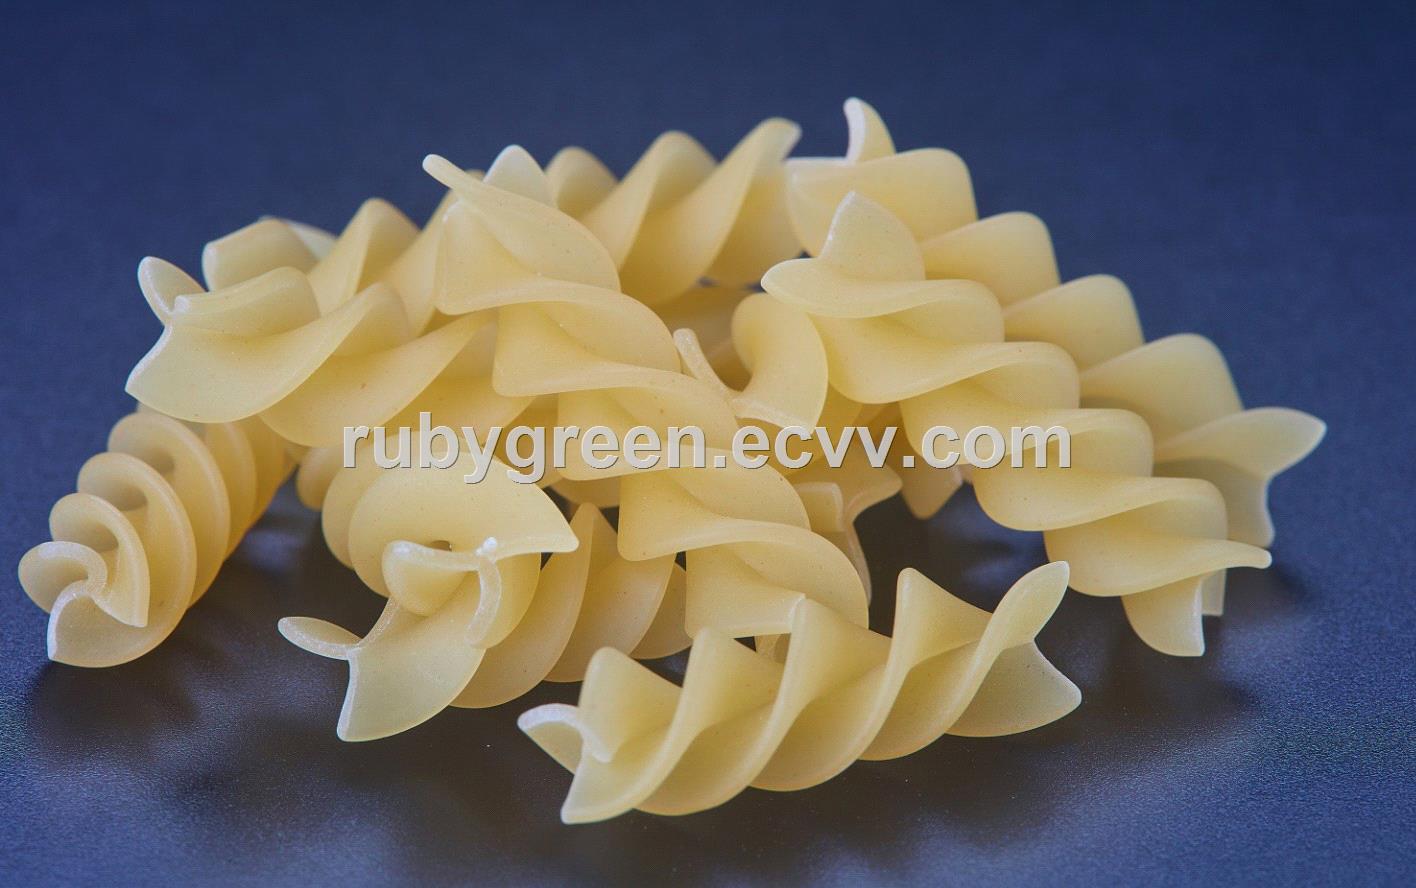 spirals Pasta with your private label